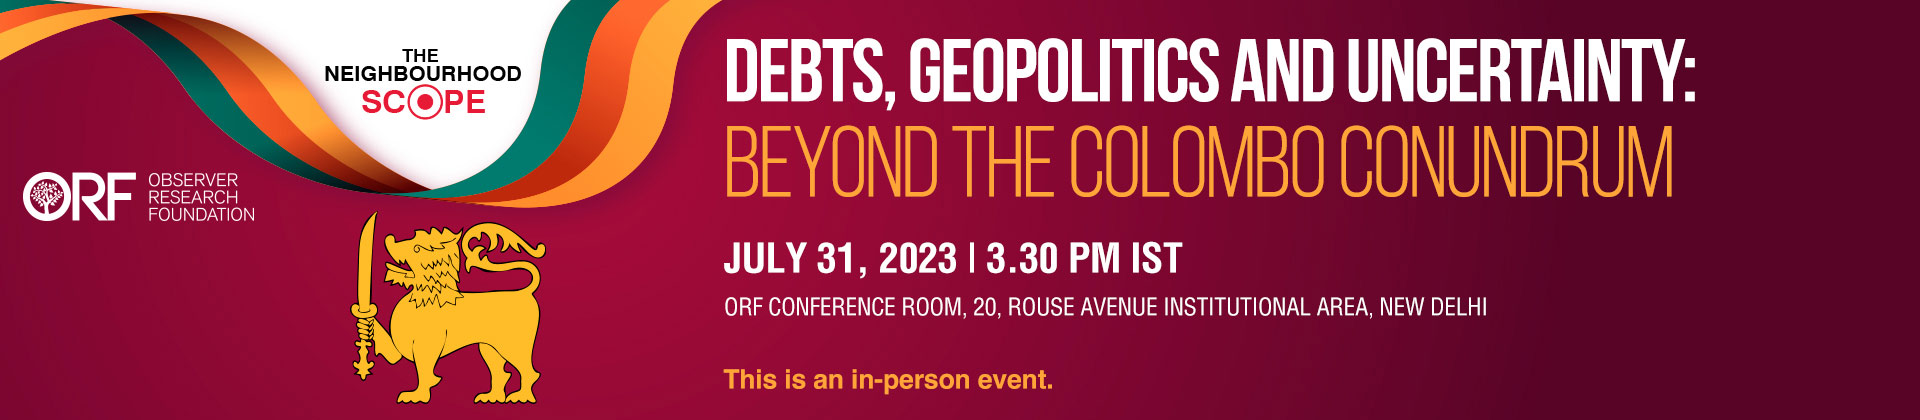 The Neighbourhood Scope | Debts, Geopolitics and Uncertainty: Beyond the Colombo Conundrum